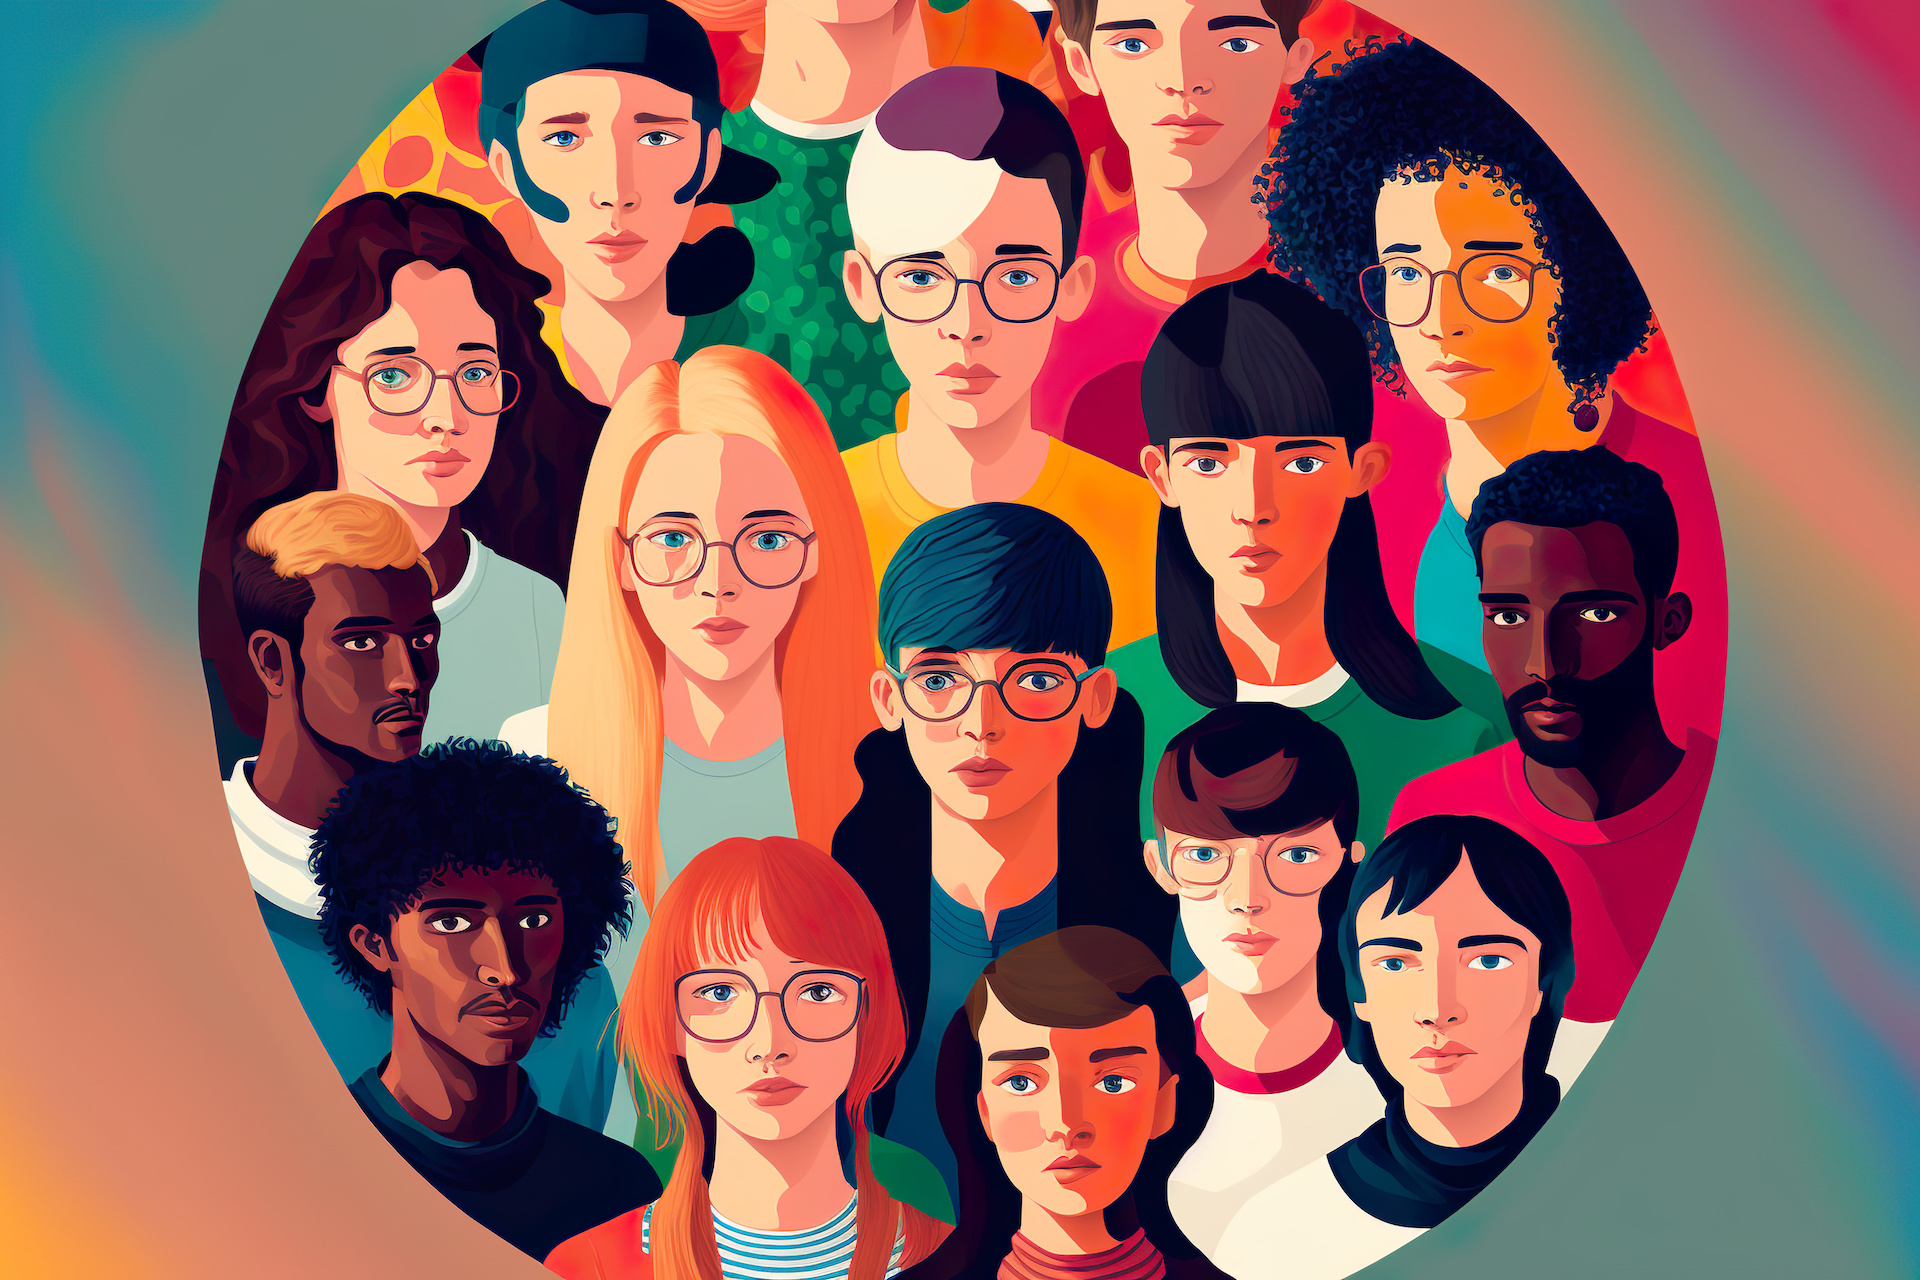 A new study of young people in the United States highlights the profound effects of gun violence and guns on school safety and its correlation with adverse mental health consequences. The specter of school shootings loomed large in the minds of young people, resulting in increased levels of depression, anxiety, feelings of isolation, and post-traumatic stress. Illustration: AdobeStock